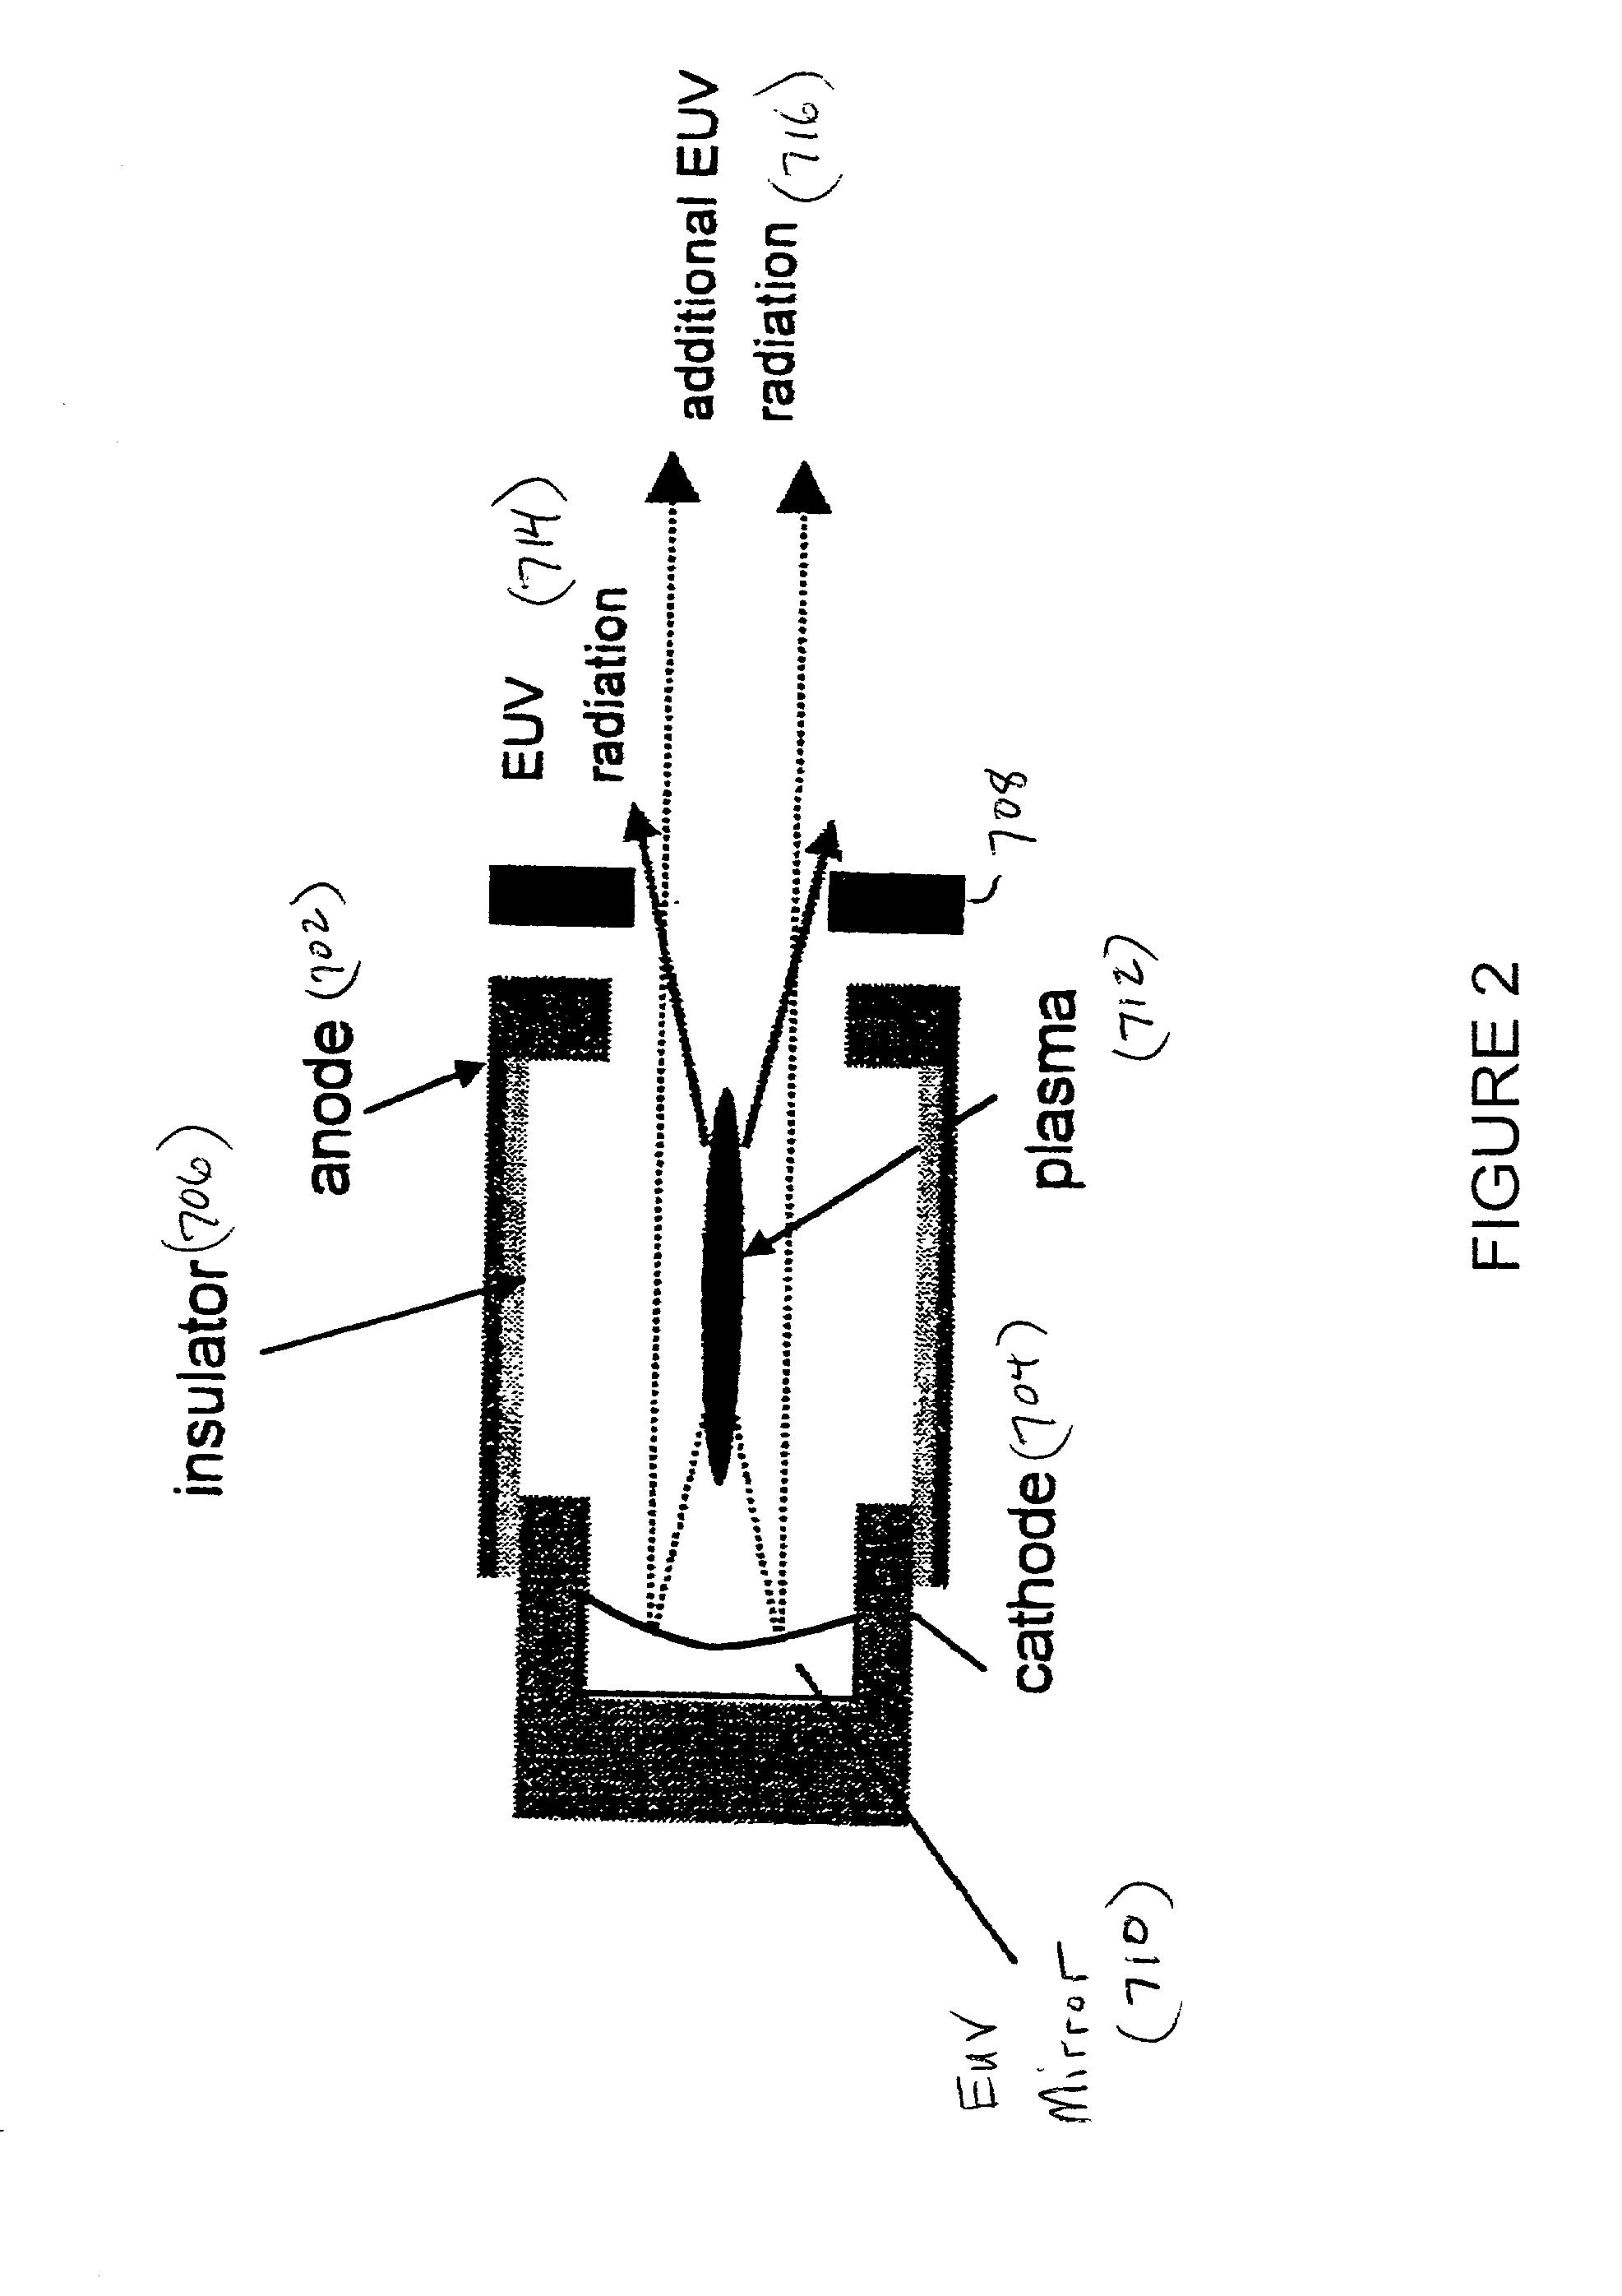 Method and apparatus for generating high output power gas discharge based source of extreme ultraviolet radiation and/or soft x-rays